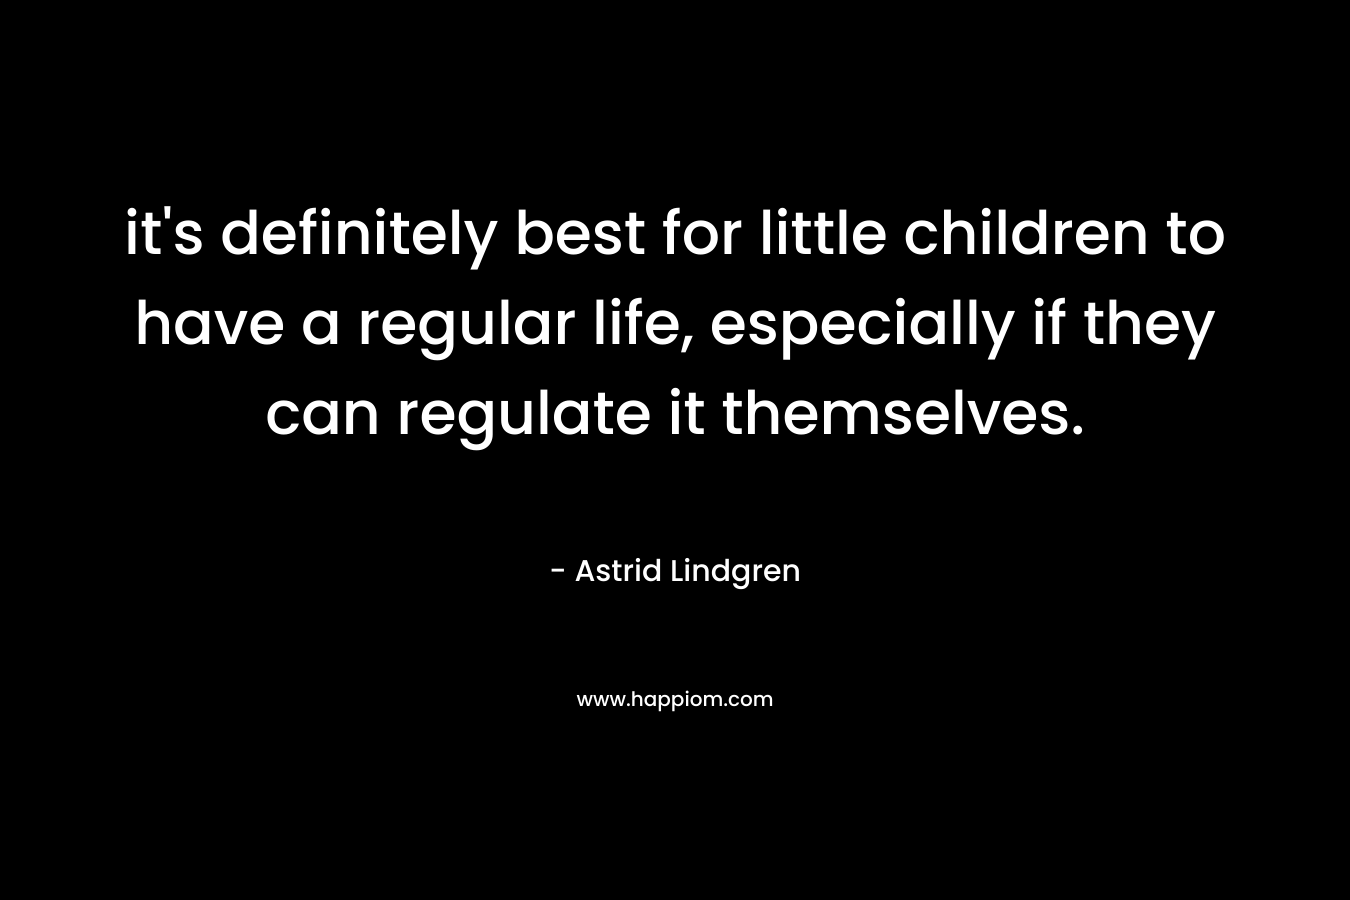 it's definitely best for little children to have a regular life, especially if they can regulate it themselves.